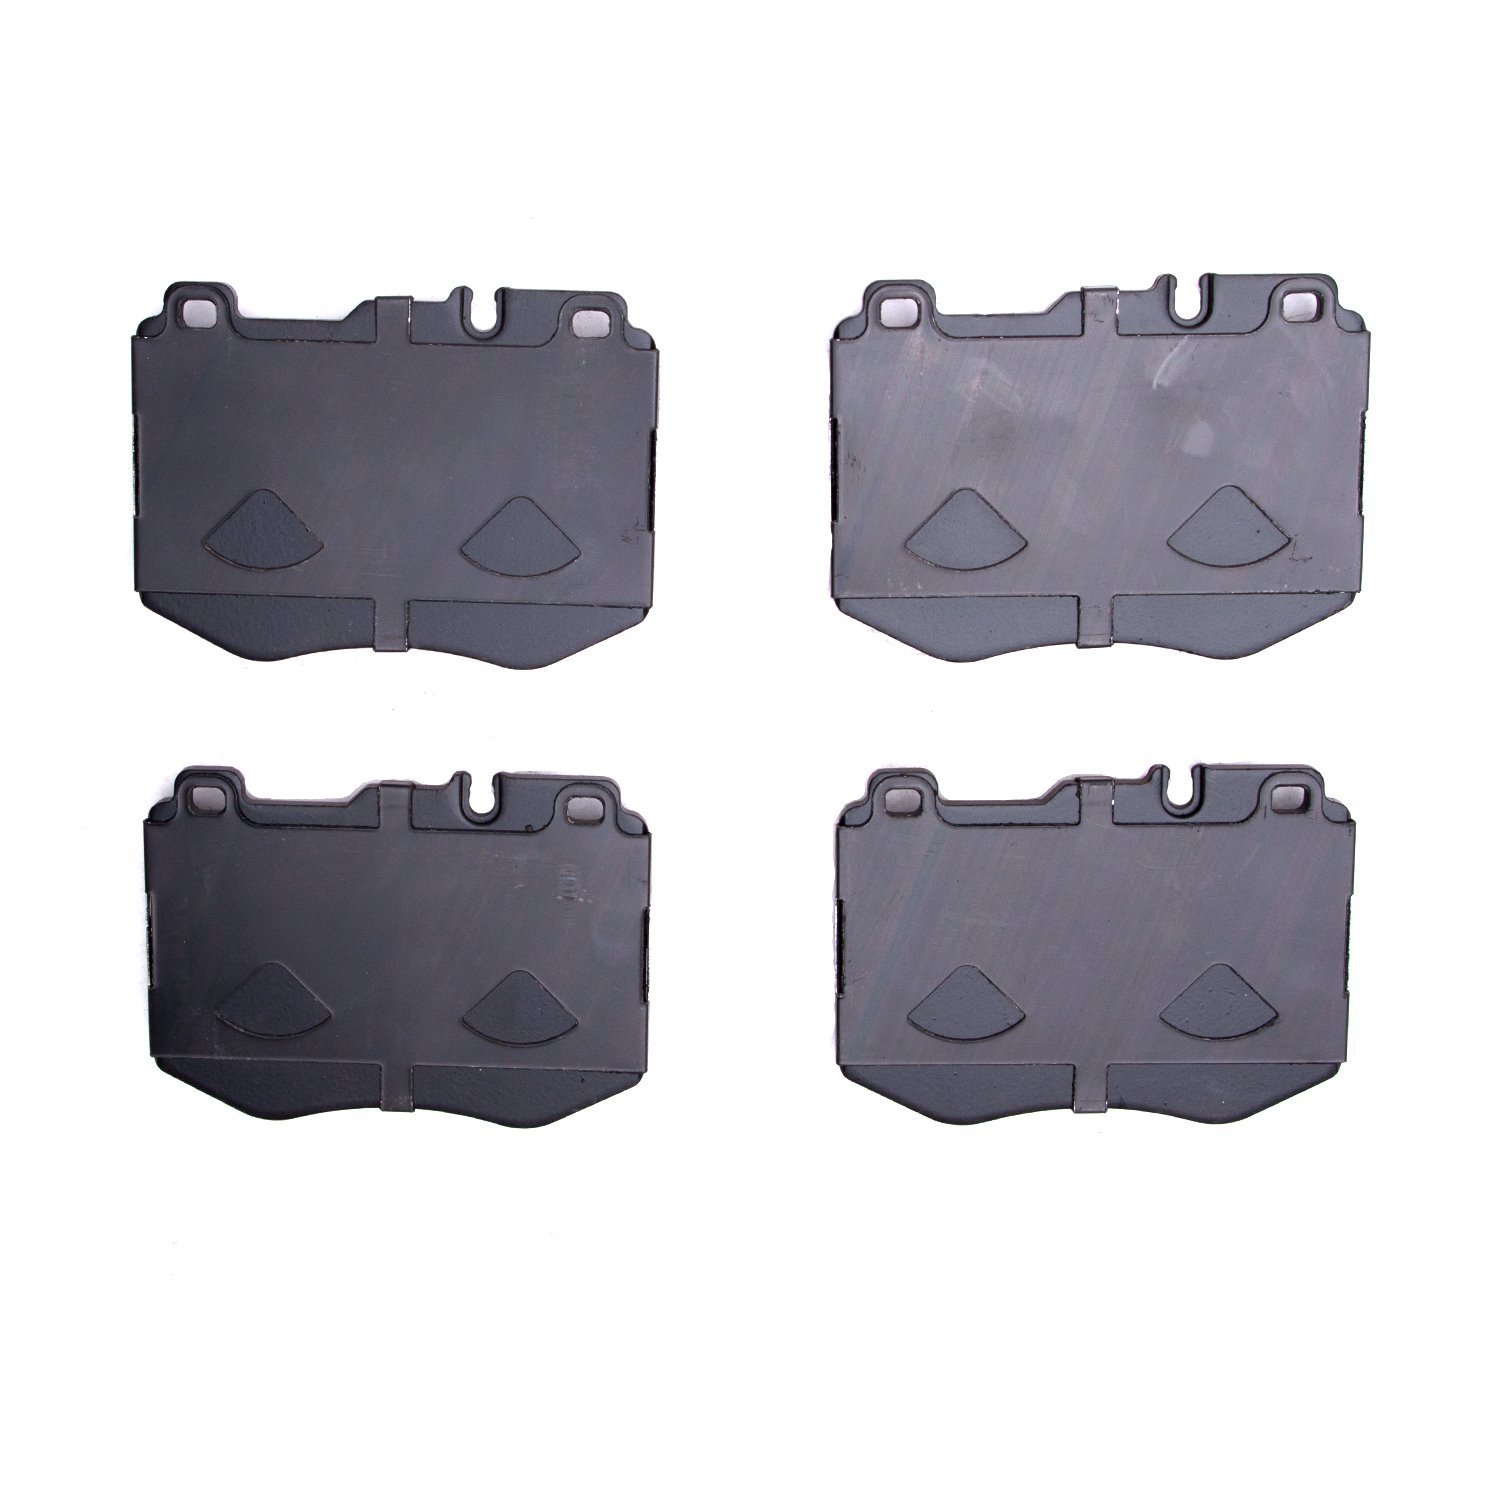 1552-1796-00 5000 Advanced Ceramic Brake Pads, Fits Select Mercedes-Benz, Position: Front